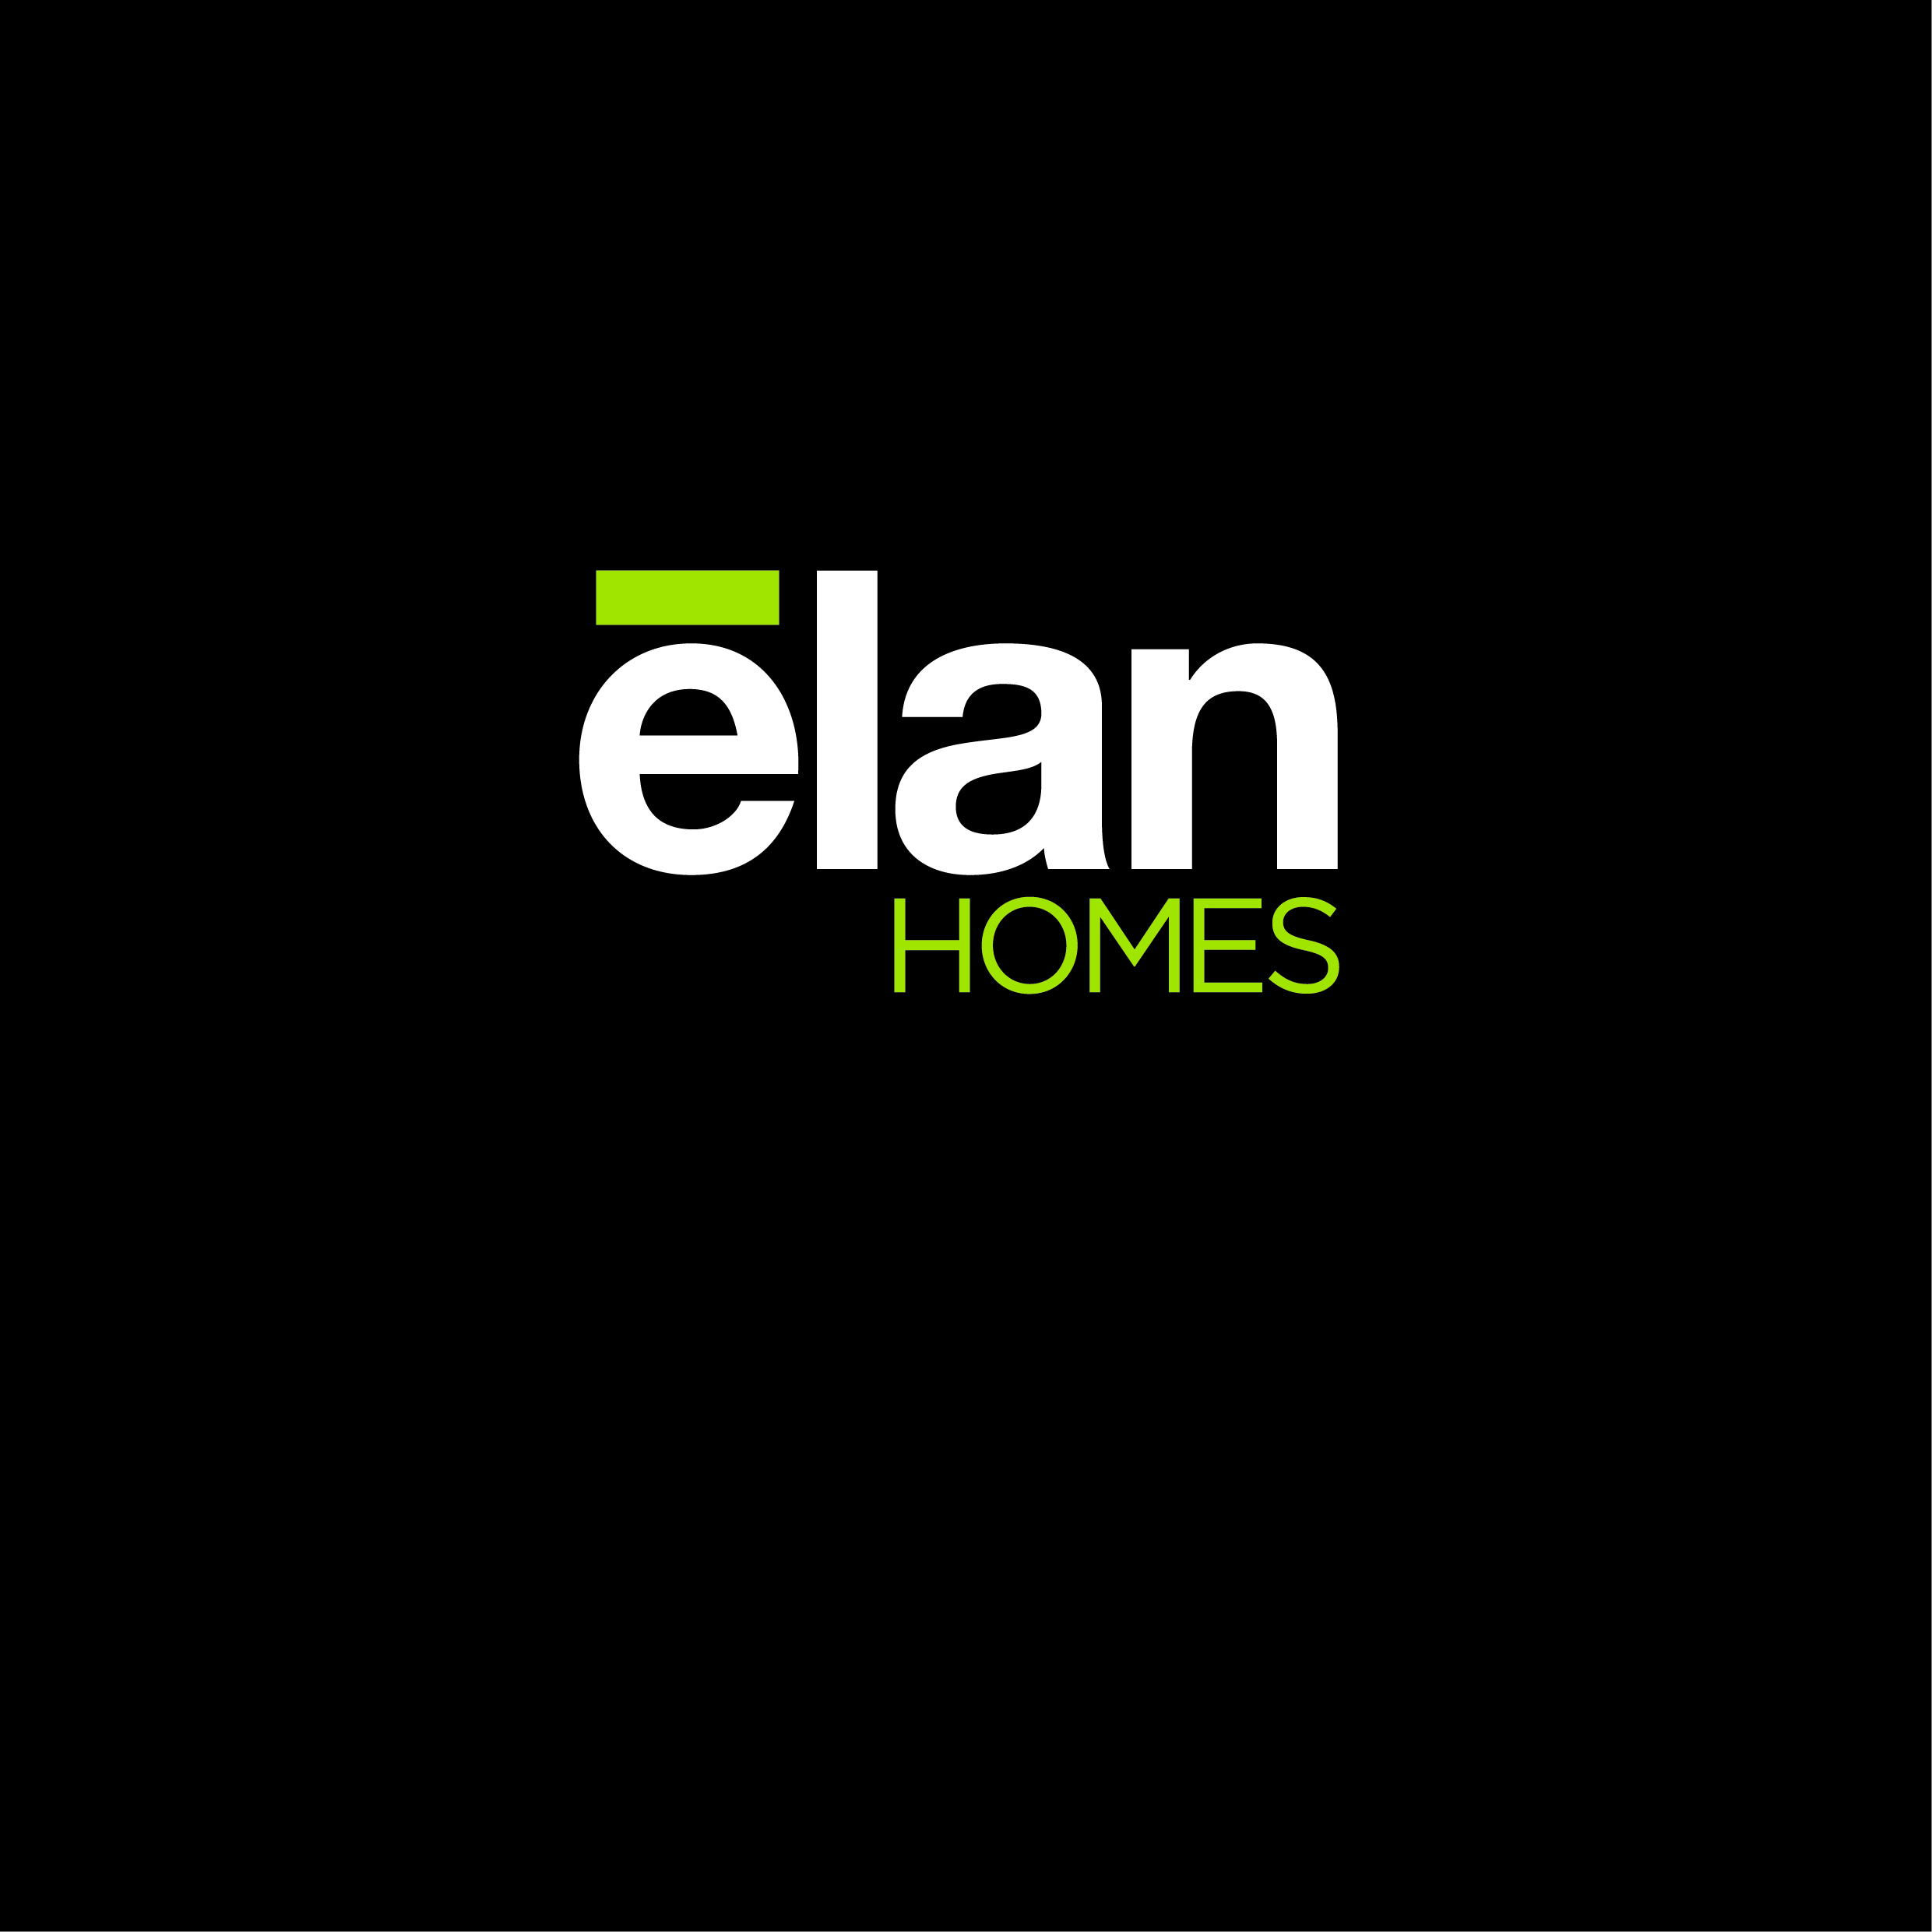 We would like to welcome Elan Homes